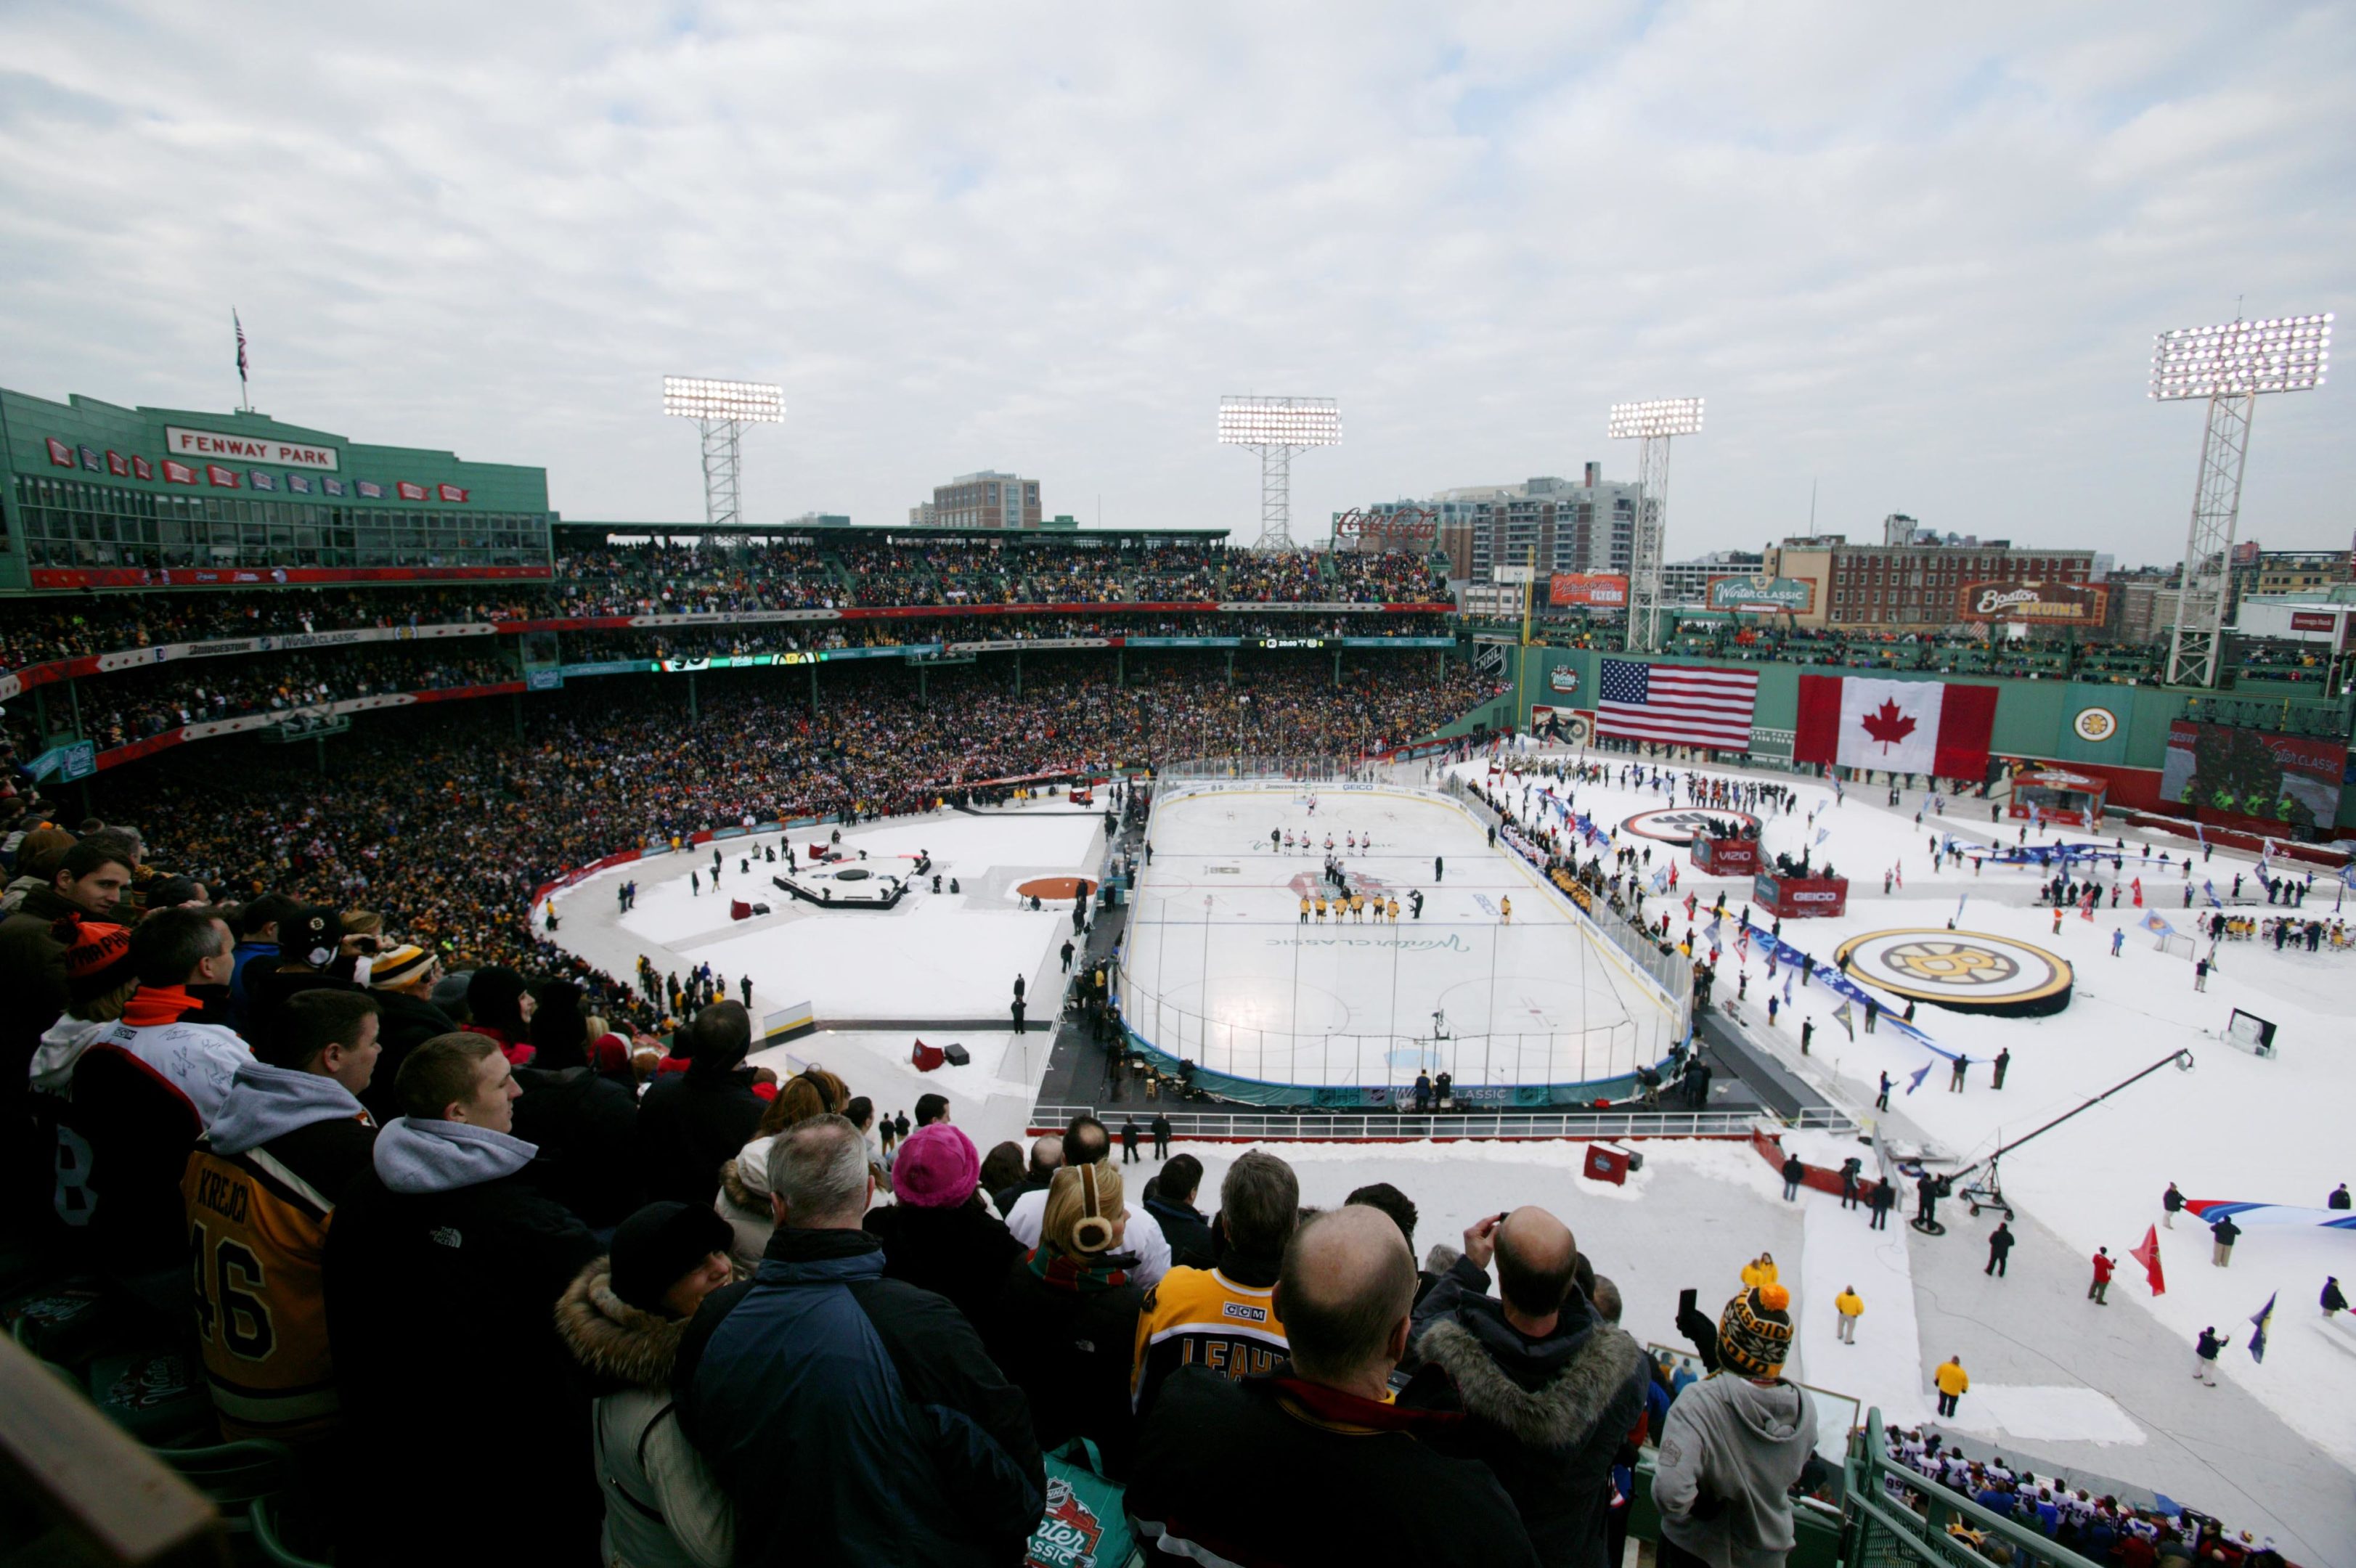 The NHL's Winter Classic will return to Fenway Park in Boston in